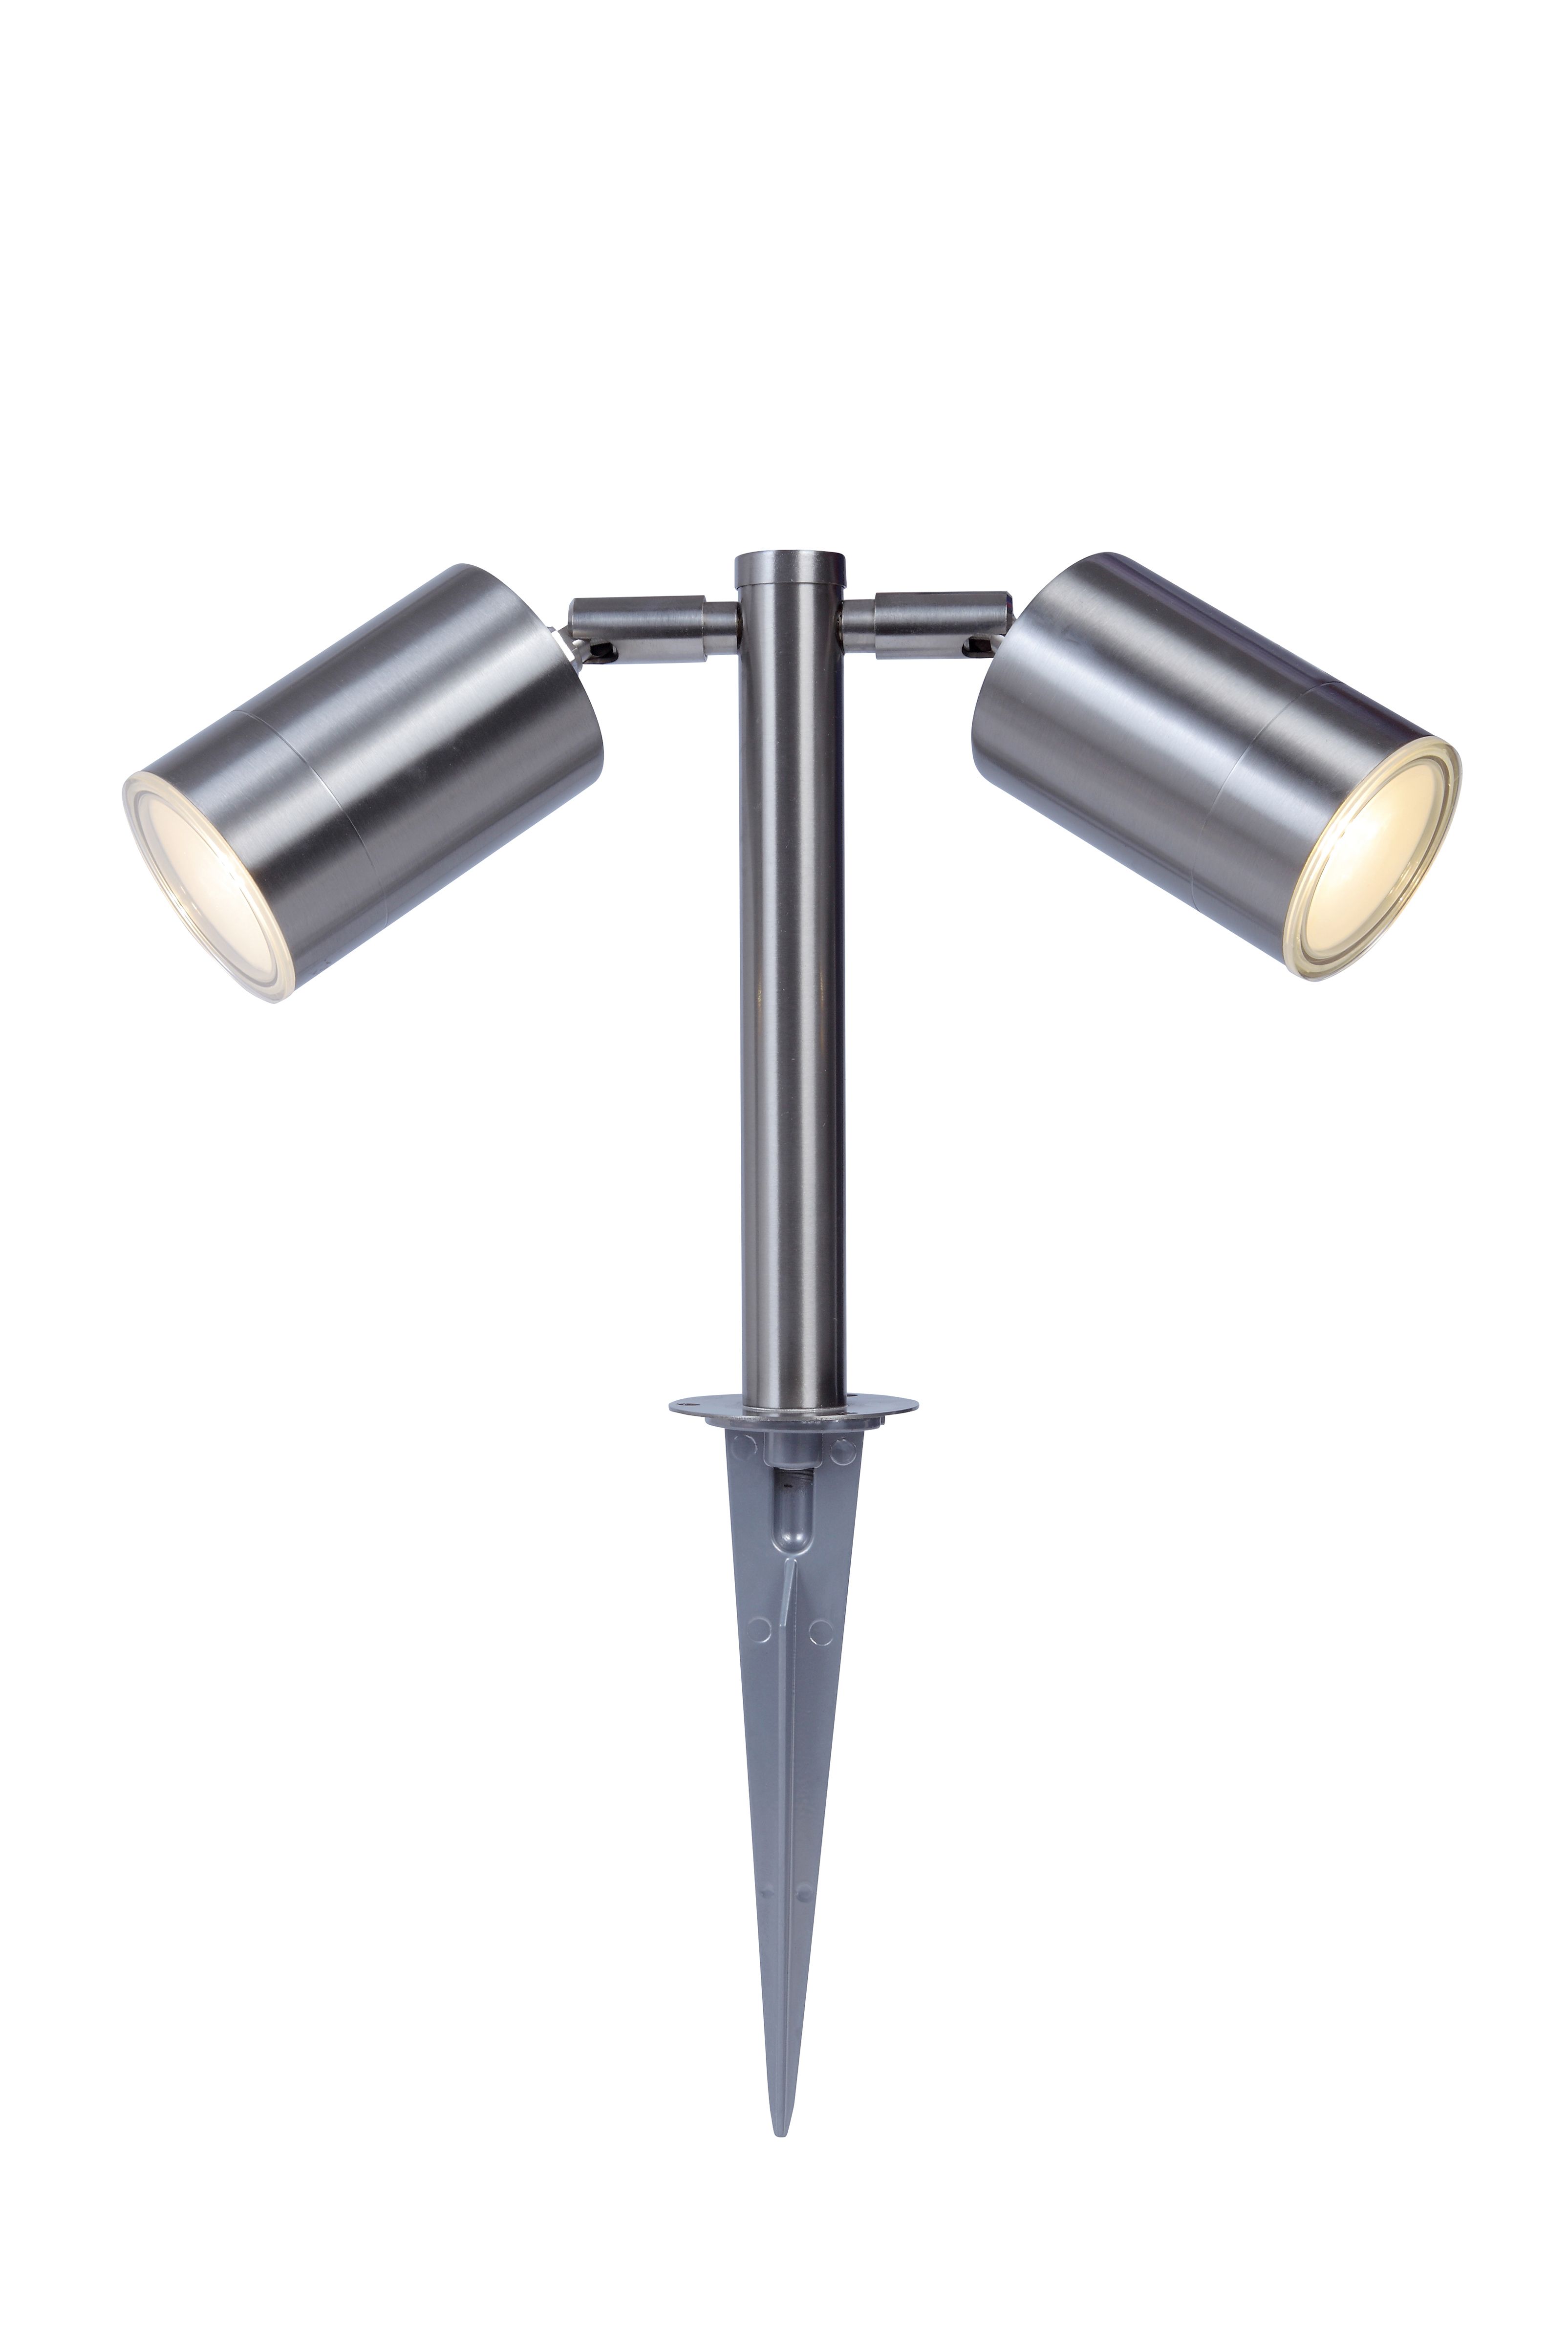 candiac Stainless steel Integrated LED Outdoor Stake light (D)60mm